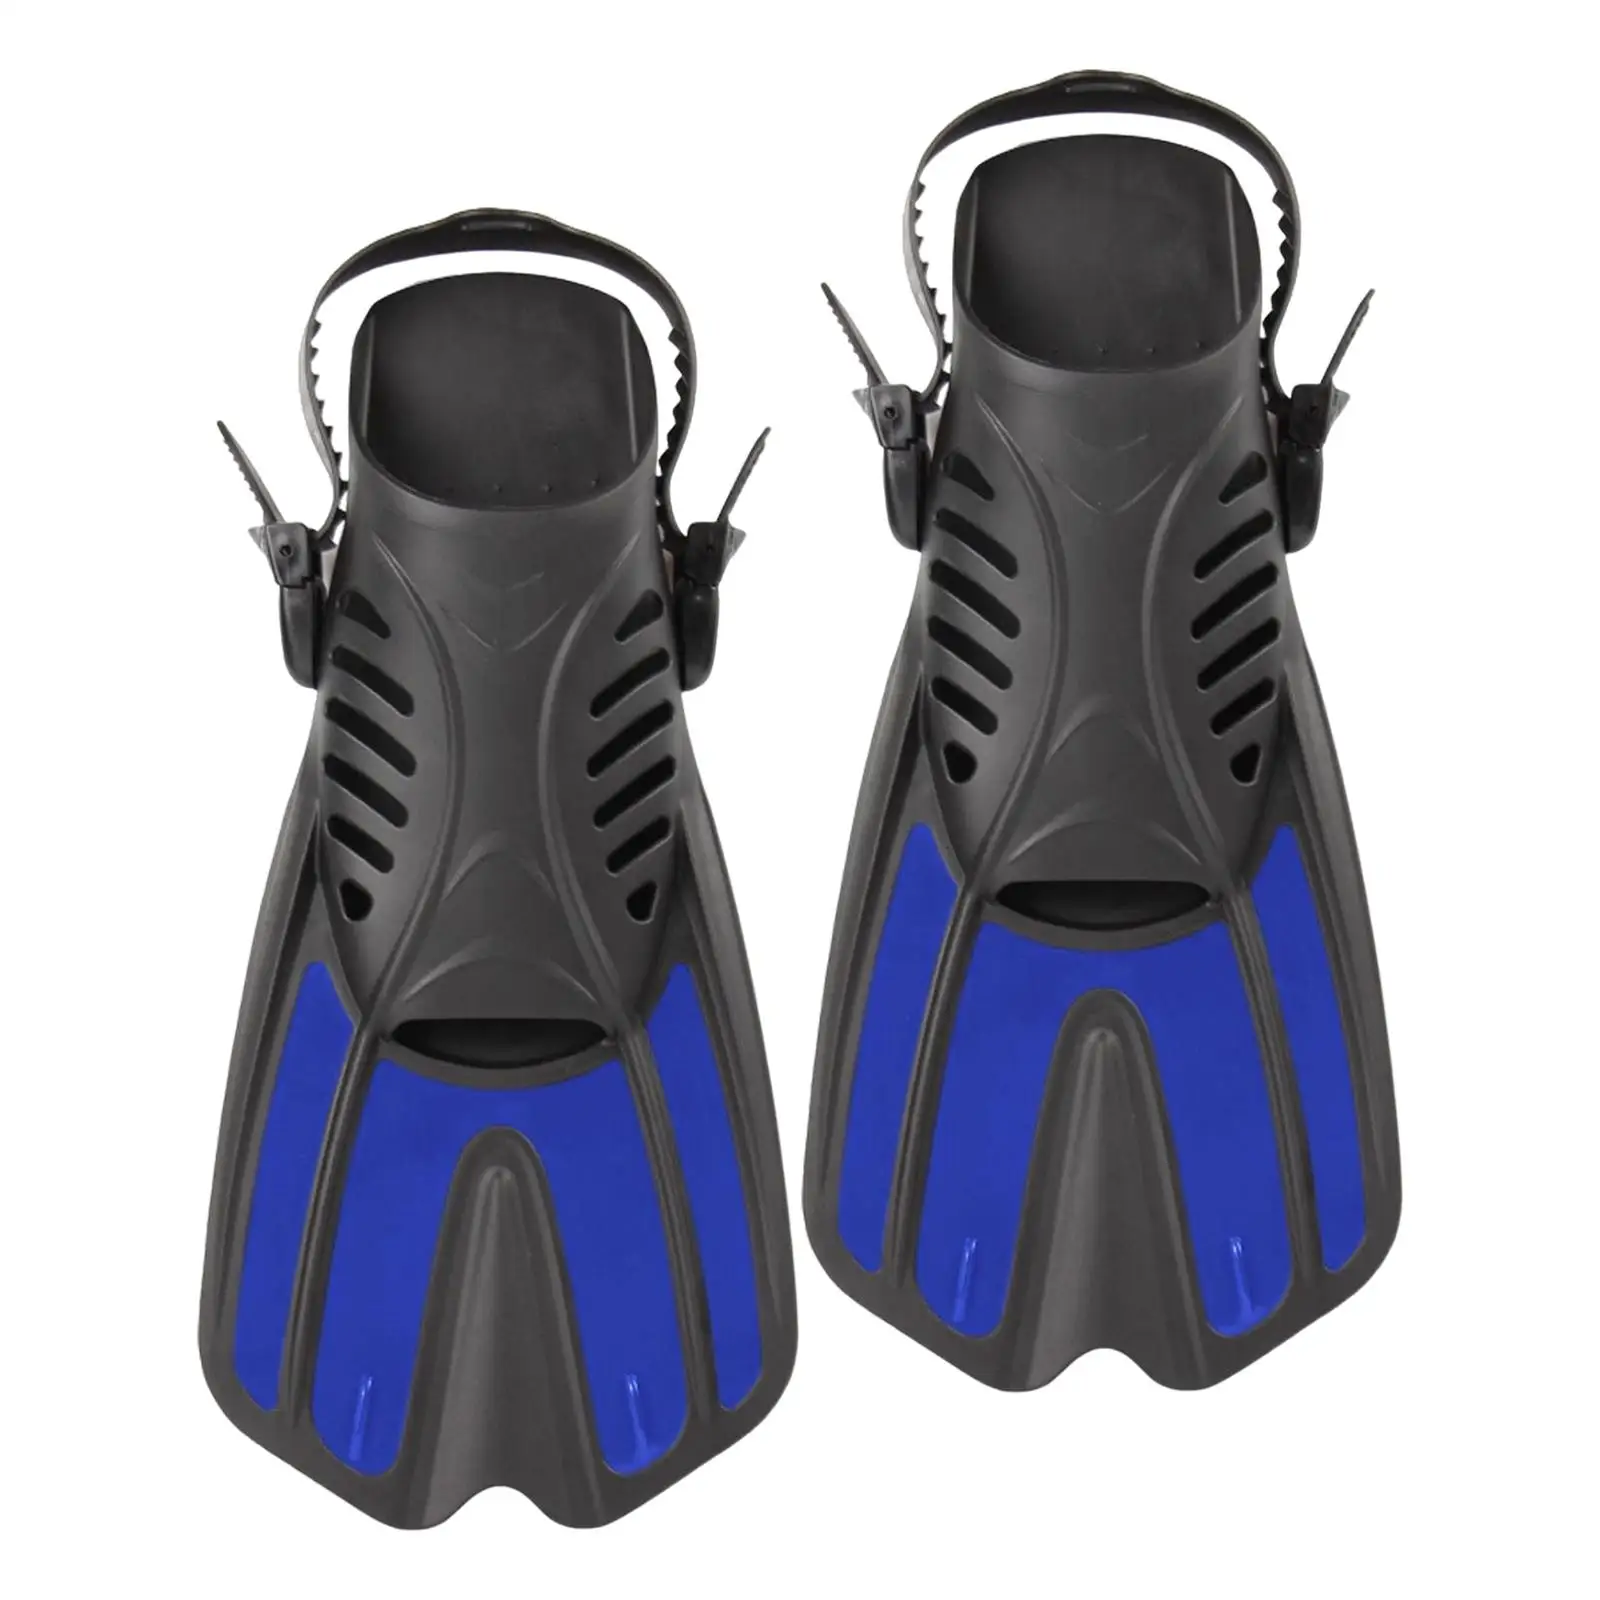 2x Professional Diving Flippers Snorkel Foot Flippers for Water Sports Beginners